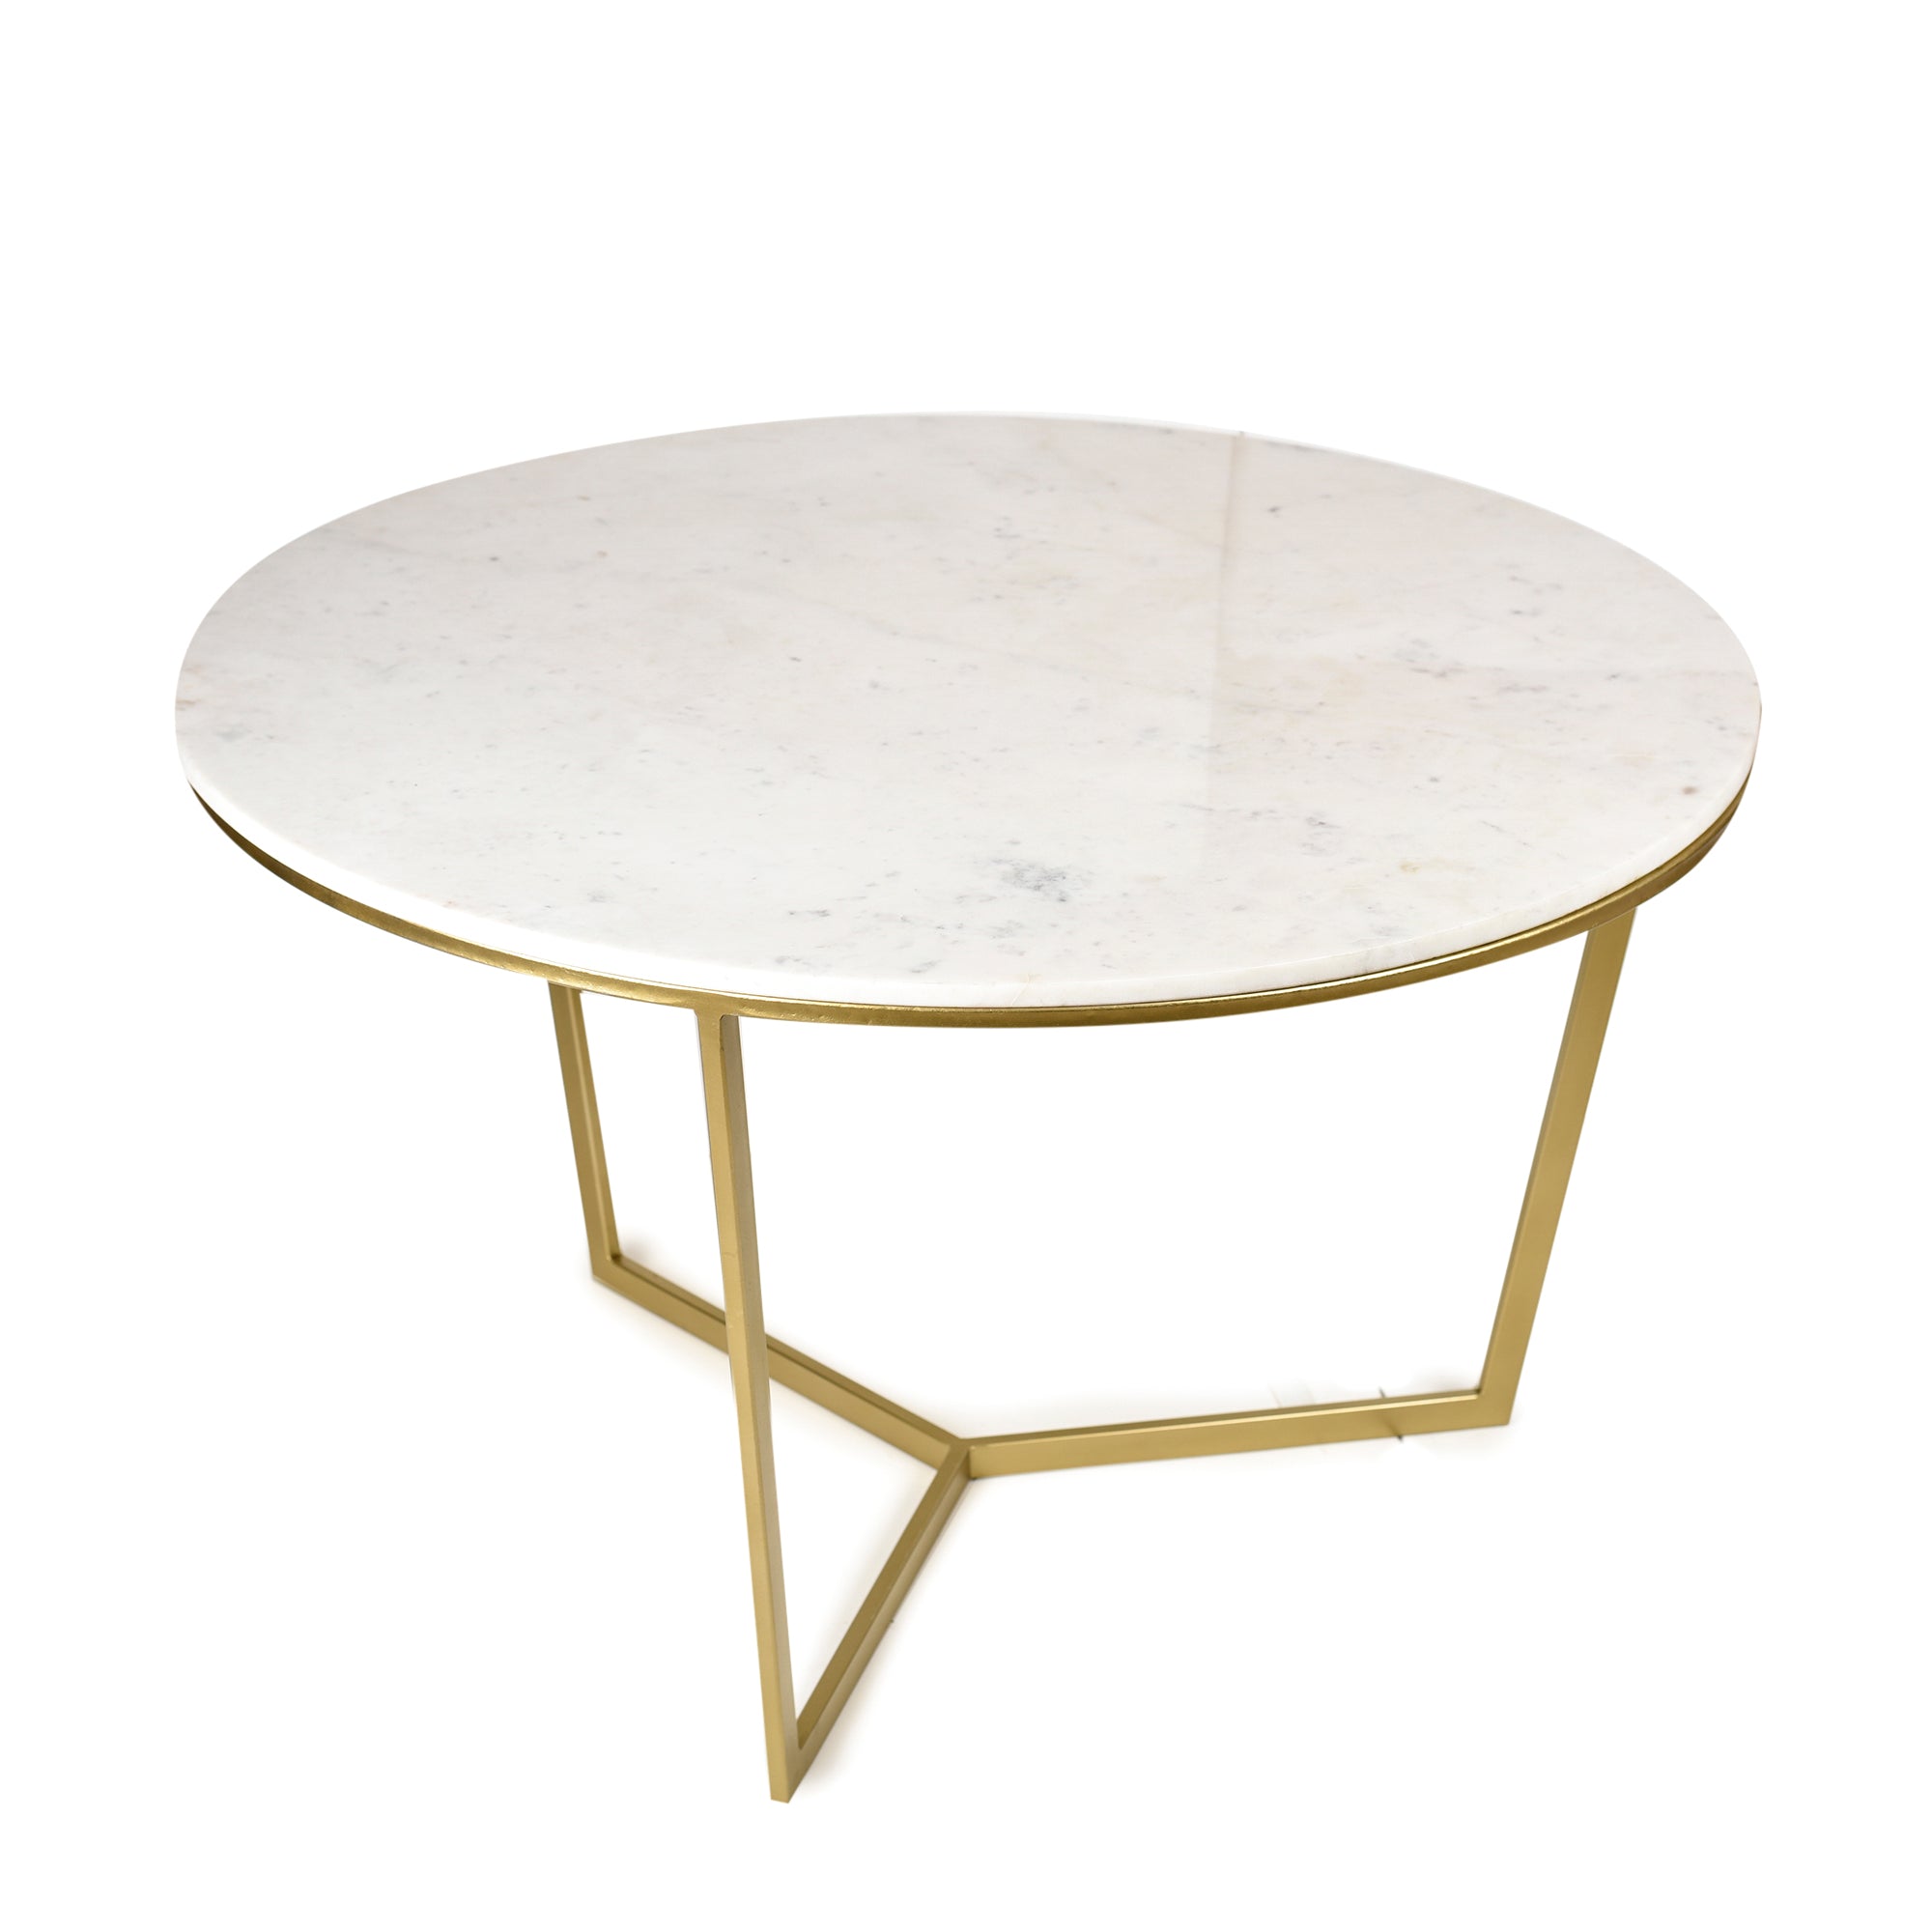 Round Coffee Table Gold and White Finish 35 inches